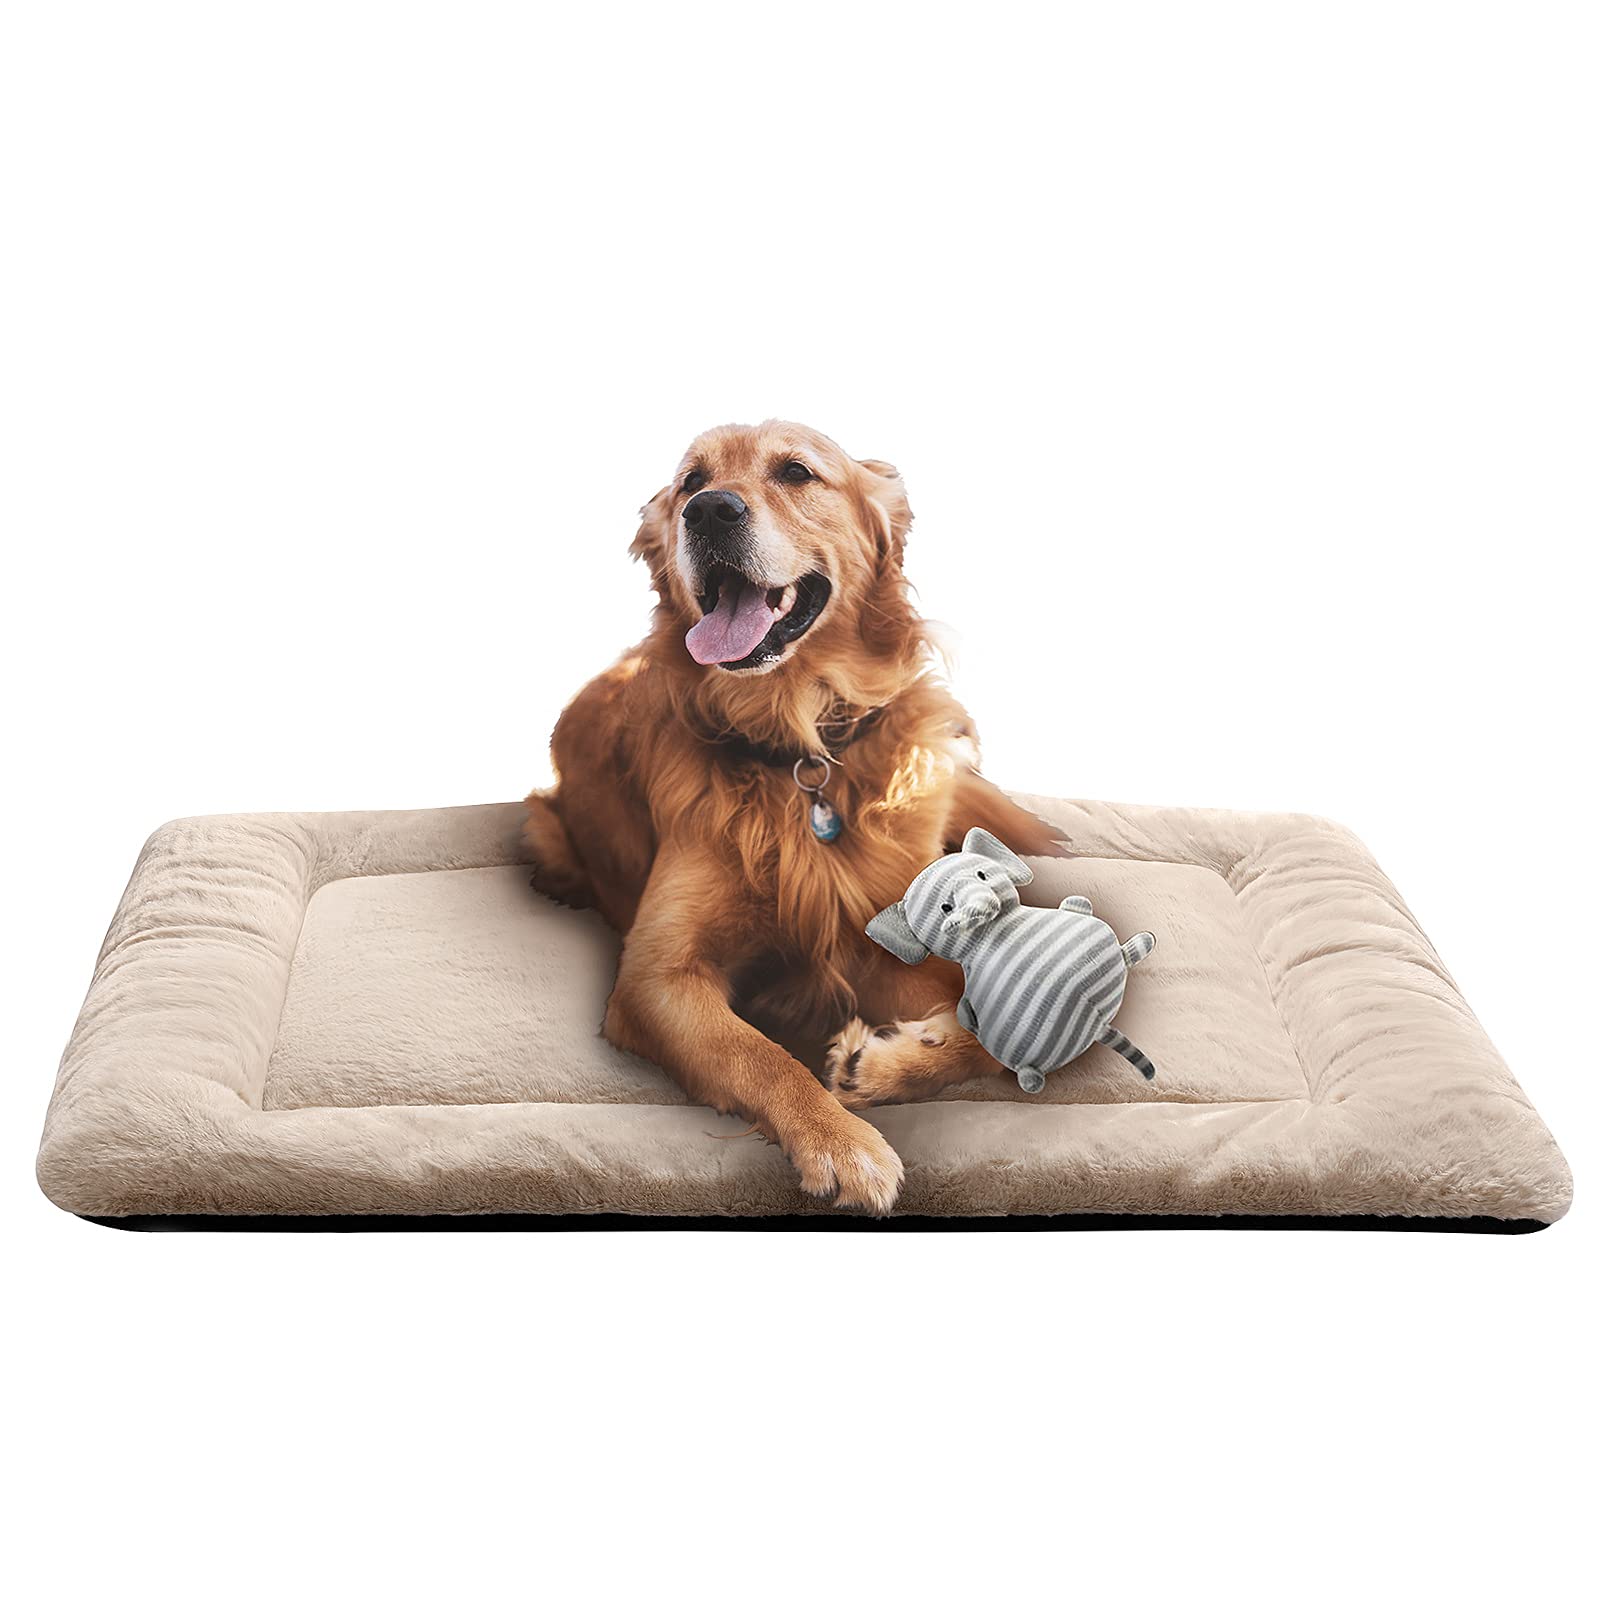 VERZEY Dog Beds crate Pad for Large Dogs Fit Metal Dog crates,Ultra Soft Dog crate Bed Washable & Anti-Slip Kennel Pad for Dogs cozy Sl